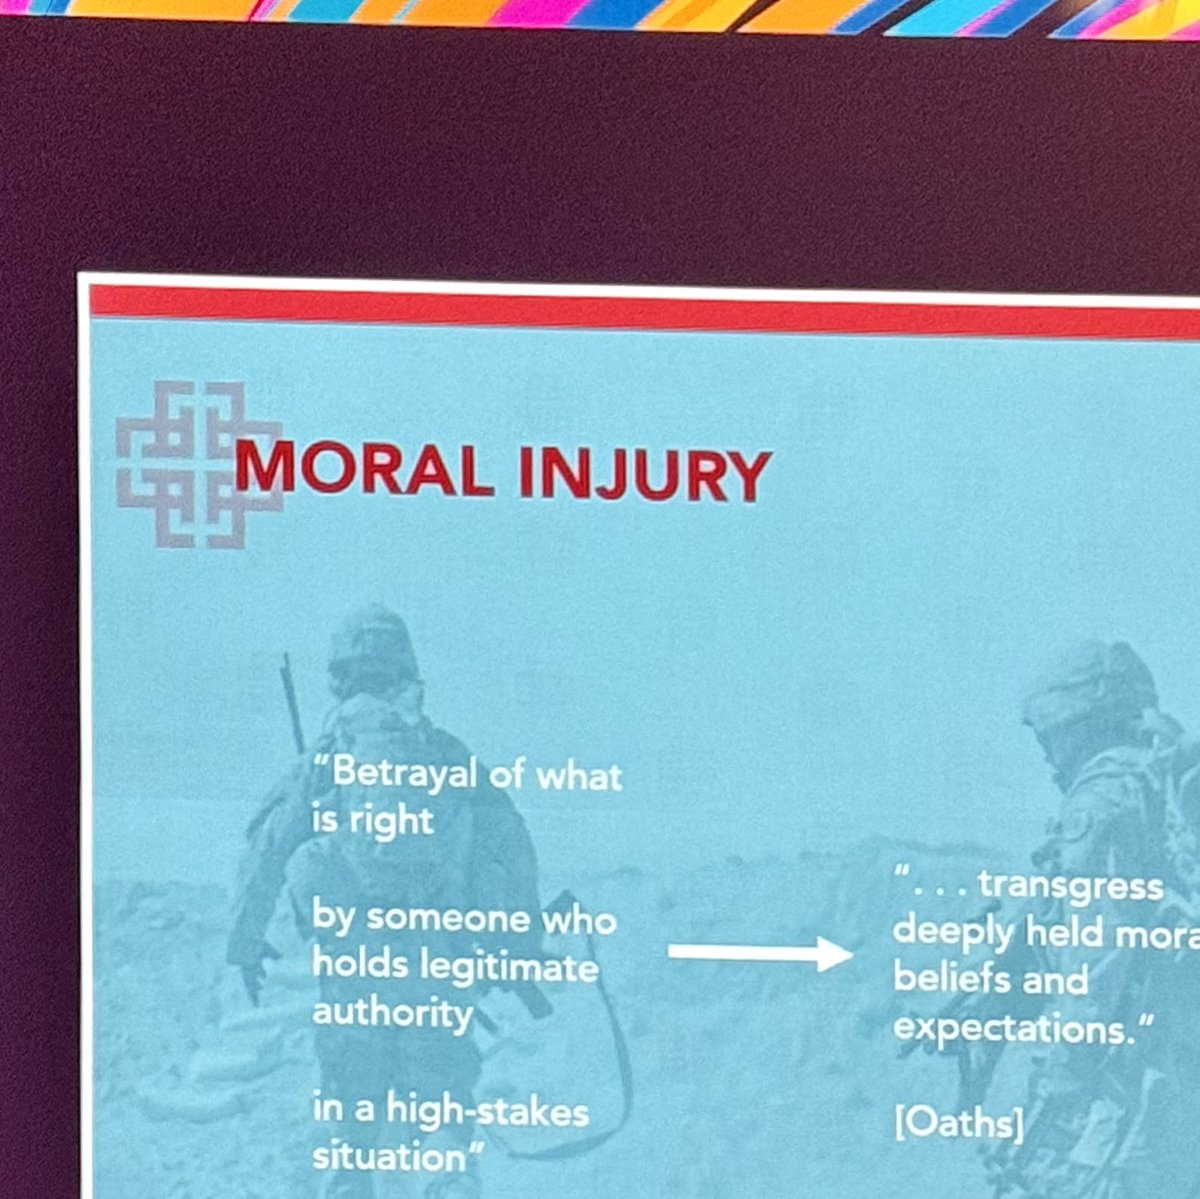 ⁦@queenofthinair⁩ I wish you were here for this talk by ⁦@WDeanMD⁩ #moralinjury #AAFPFMX Brilliant!